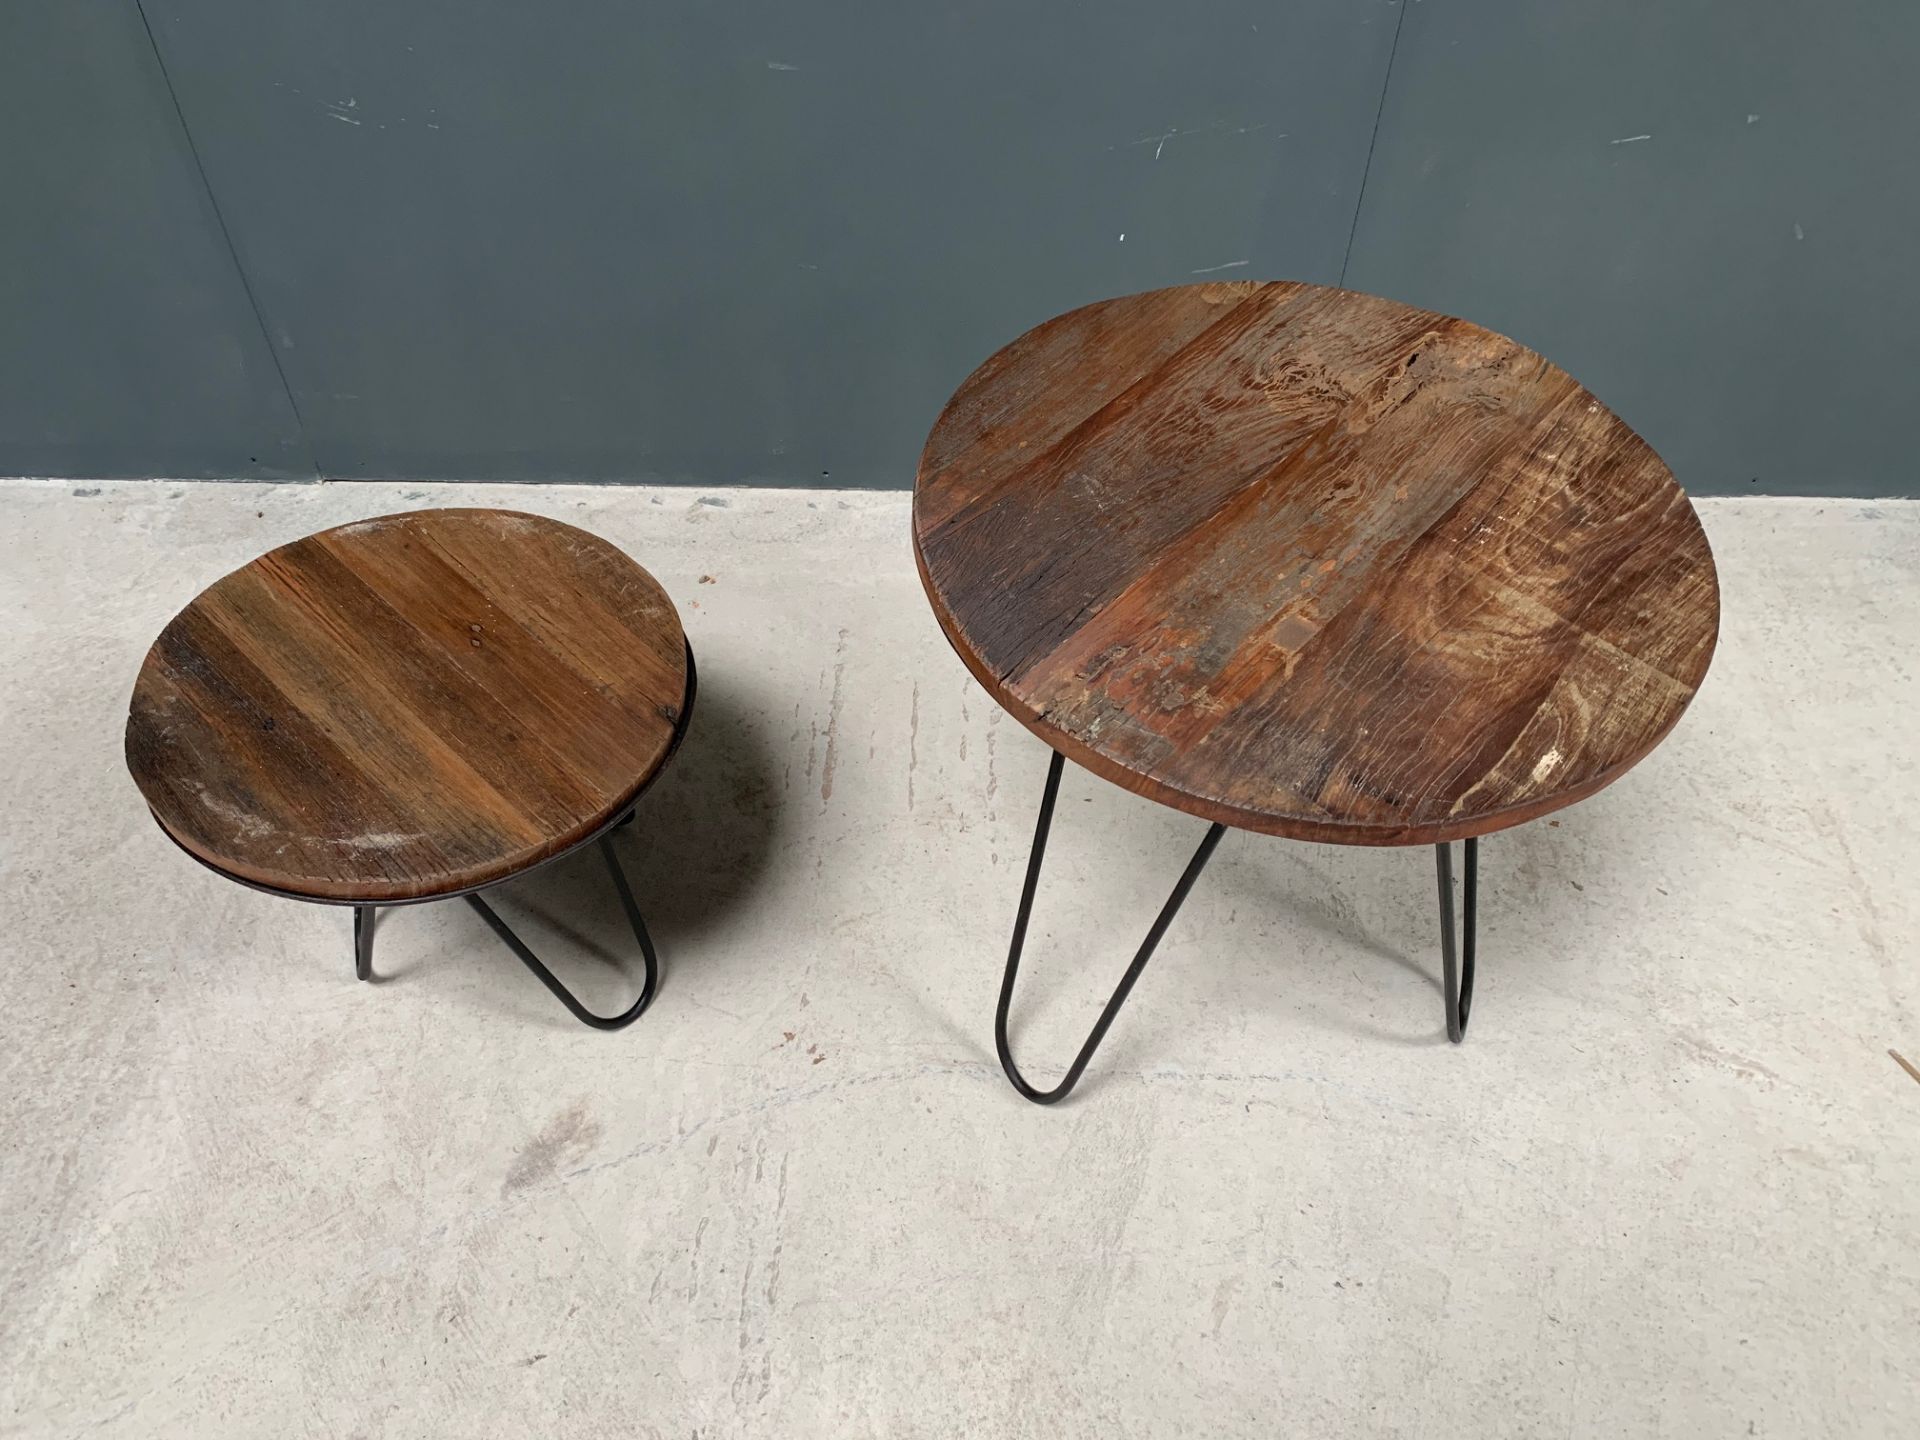 Brand New Boxed Pair Of Indian Tagari Side Tables In A Rustic Finish - Image 2 of 3